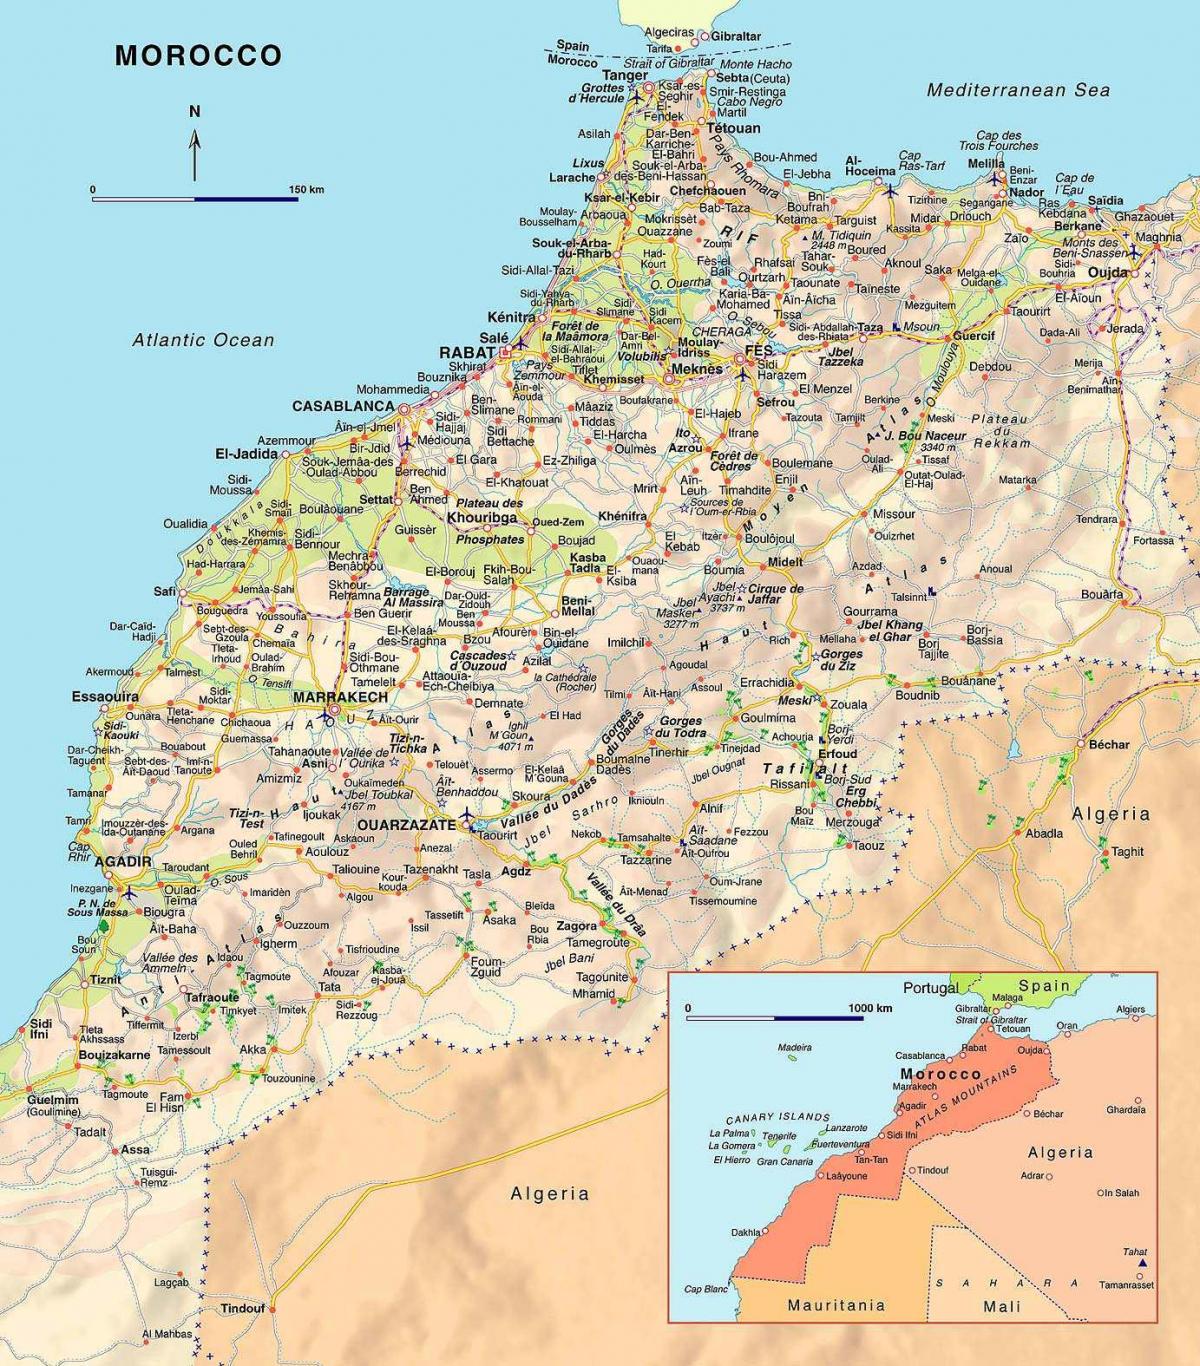 Driving map of Morocco